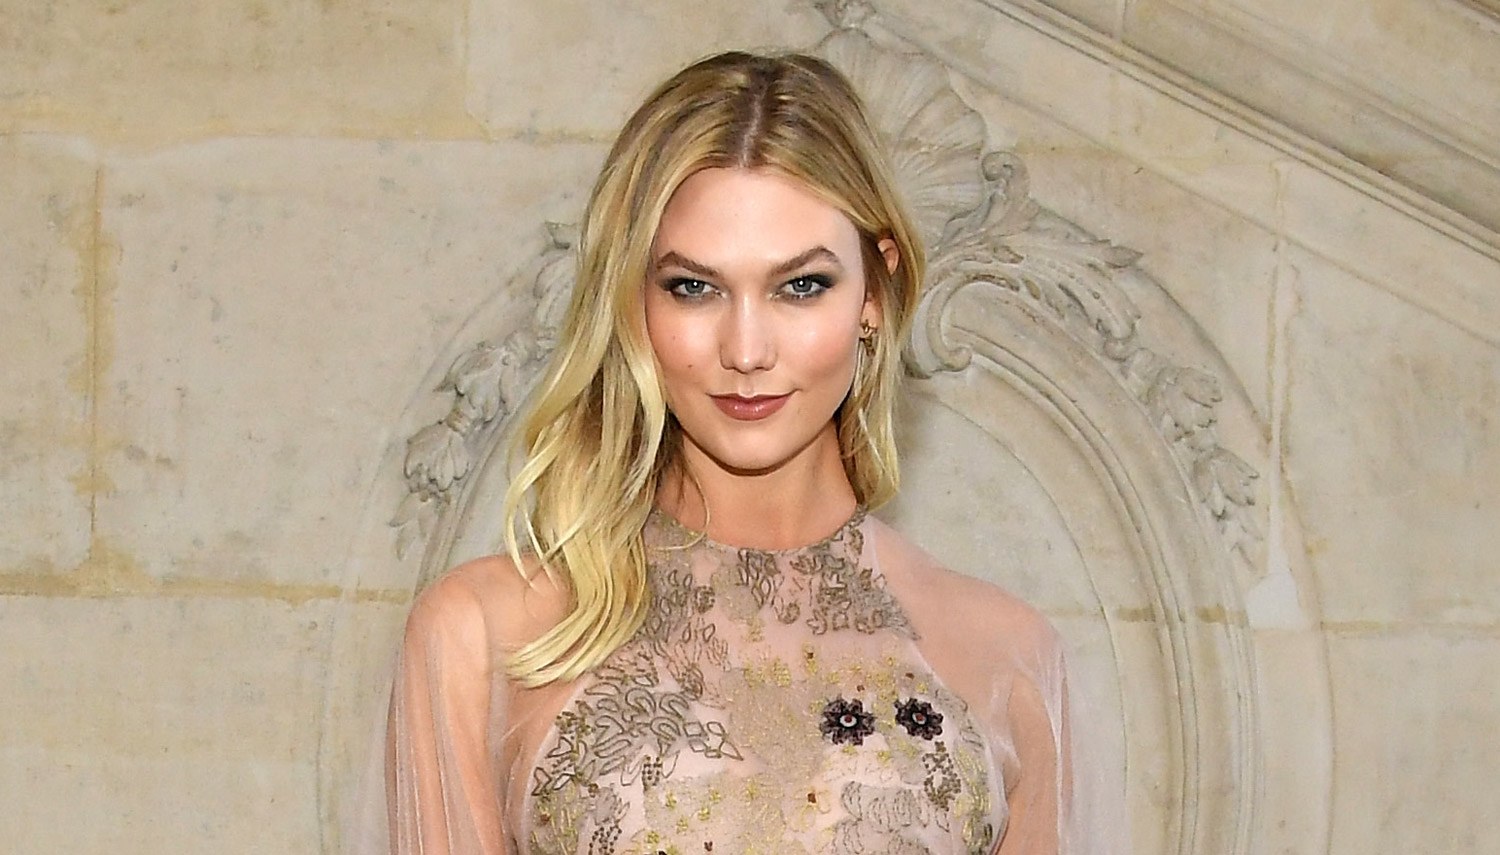 Karlie Kloss Leads Group of Investors to Acquire ‘W Magazine’